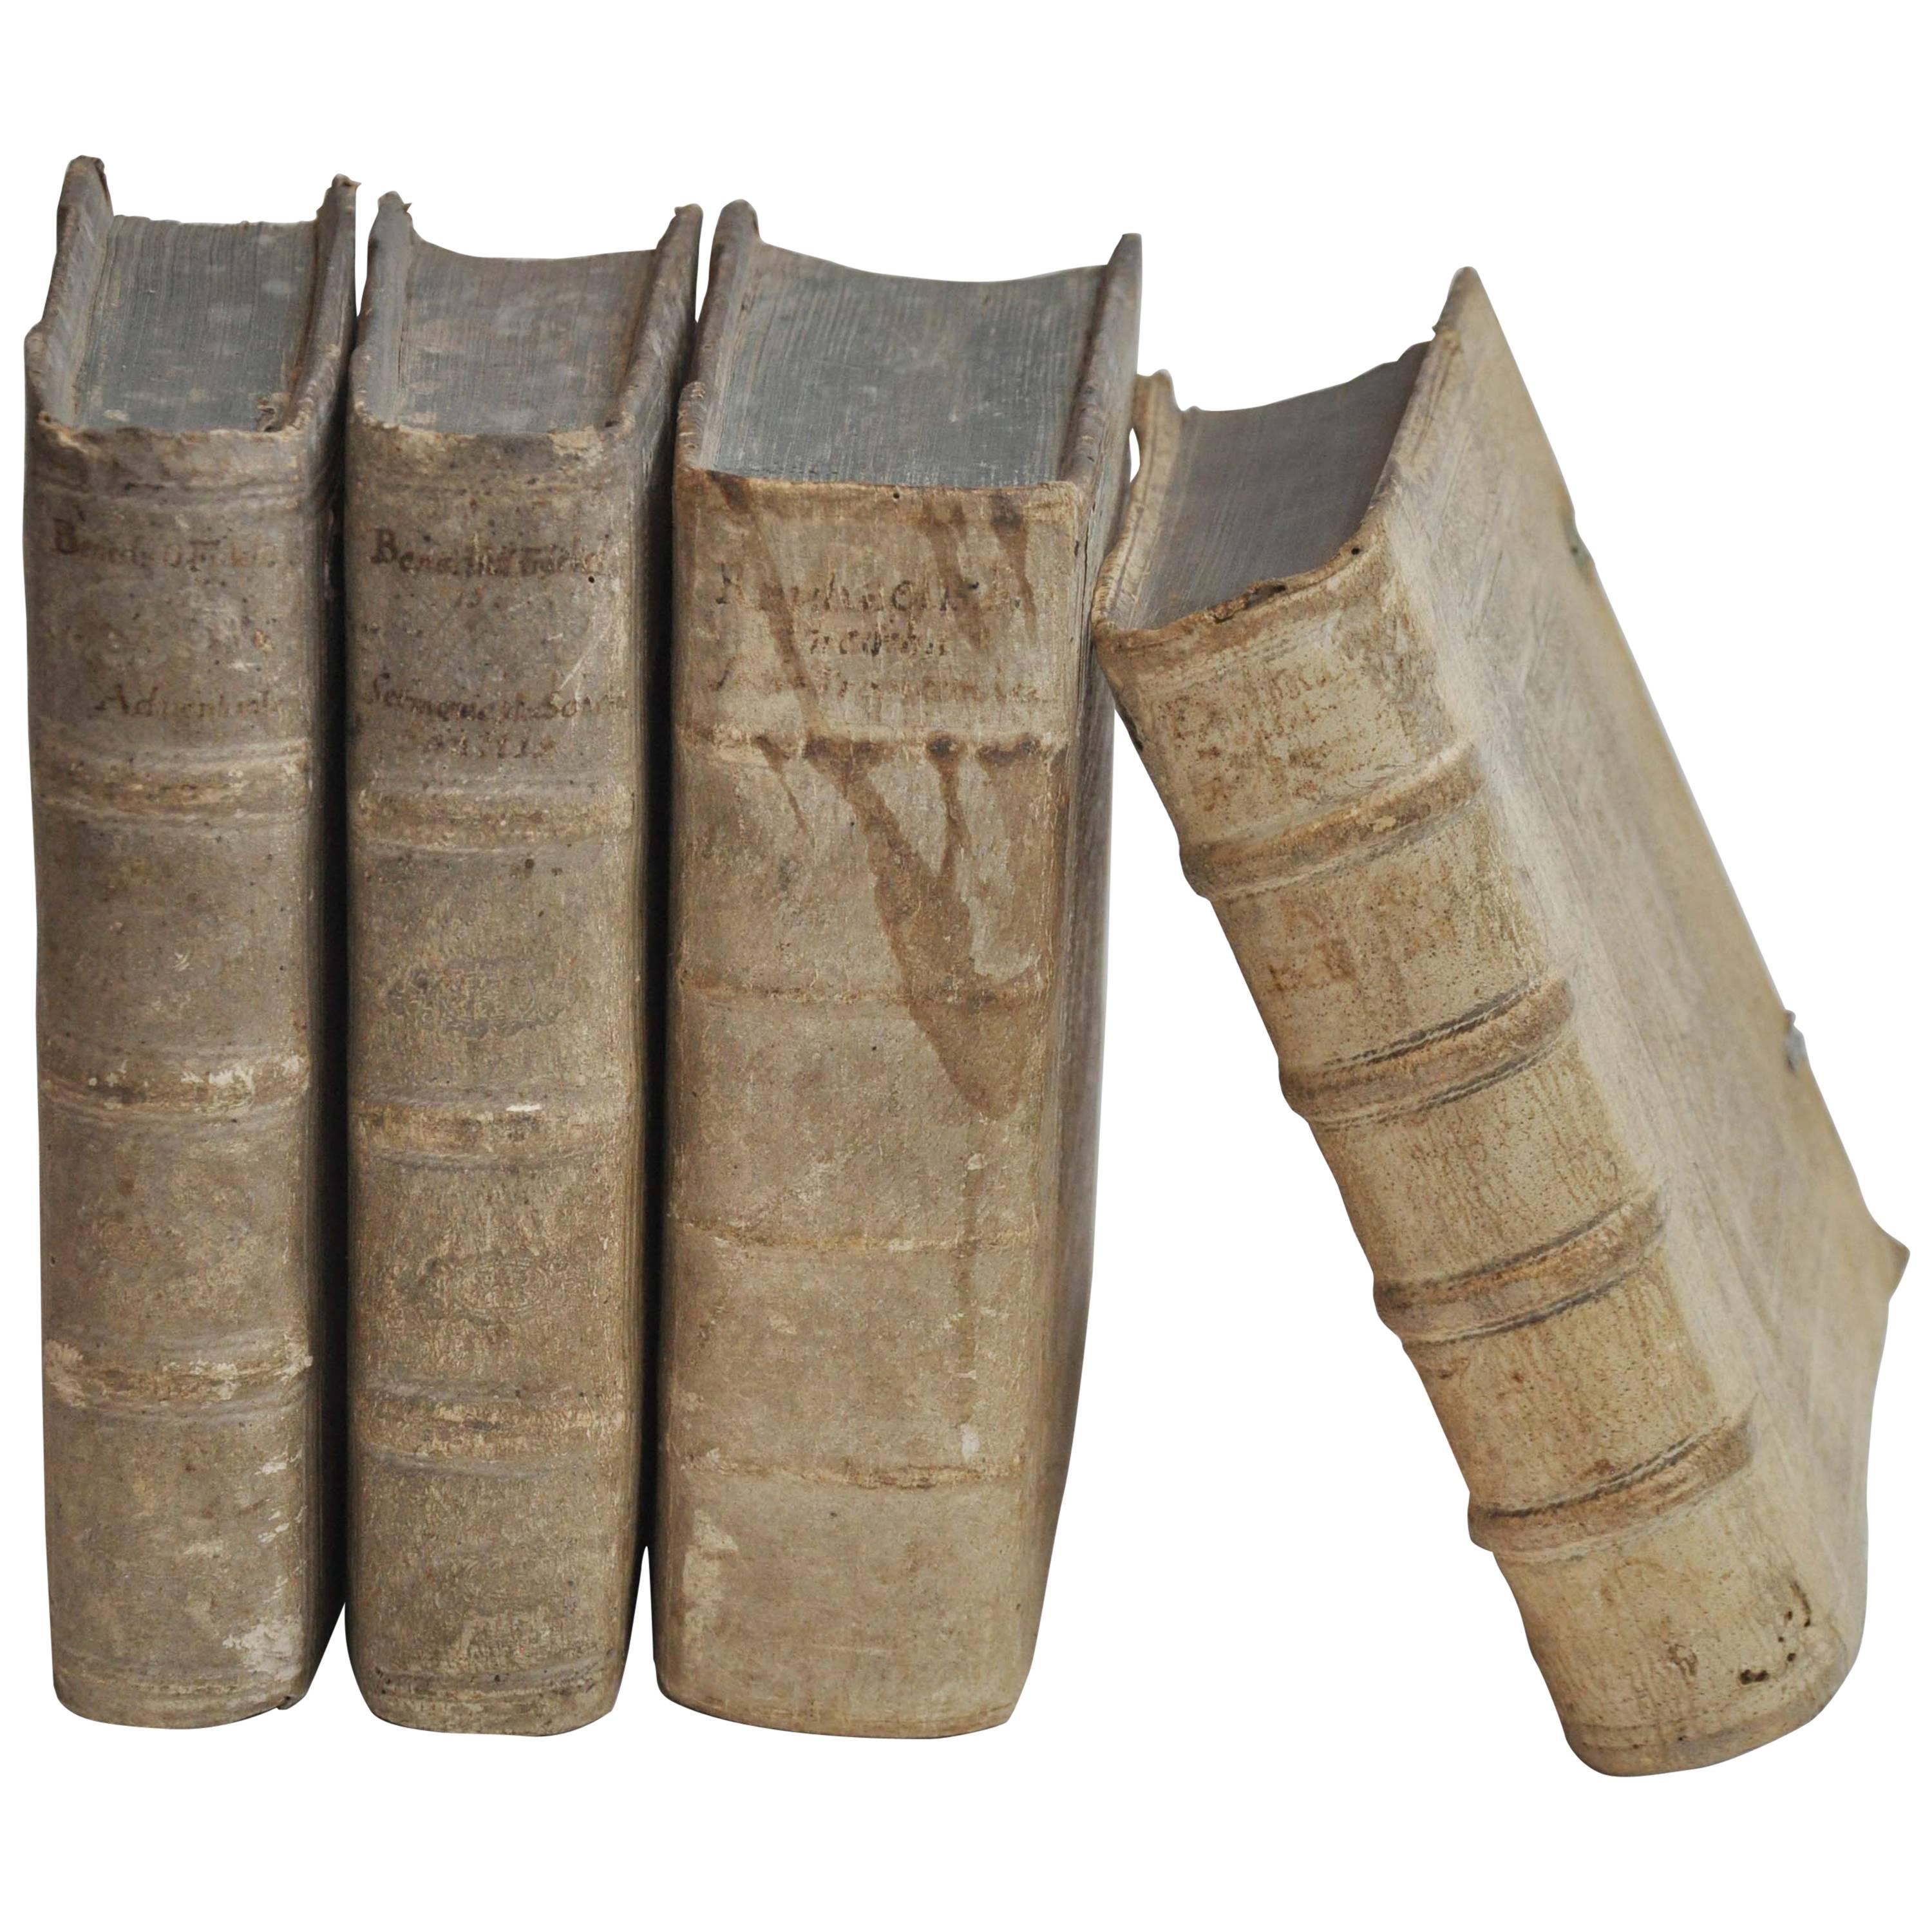 17th Century Collection of Four Rare European Vellum Books with Buckles